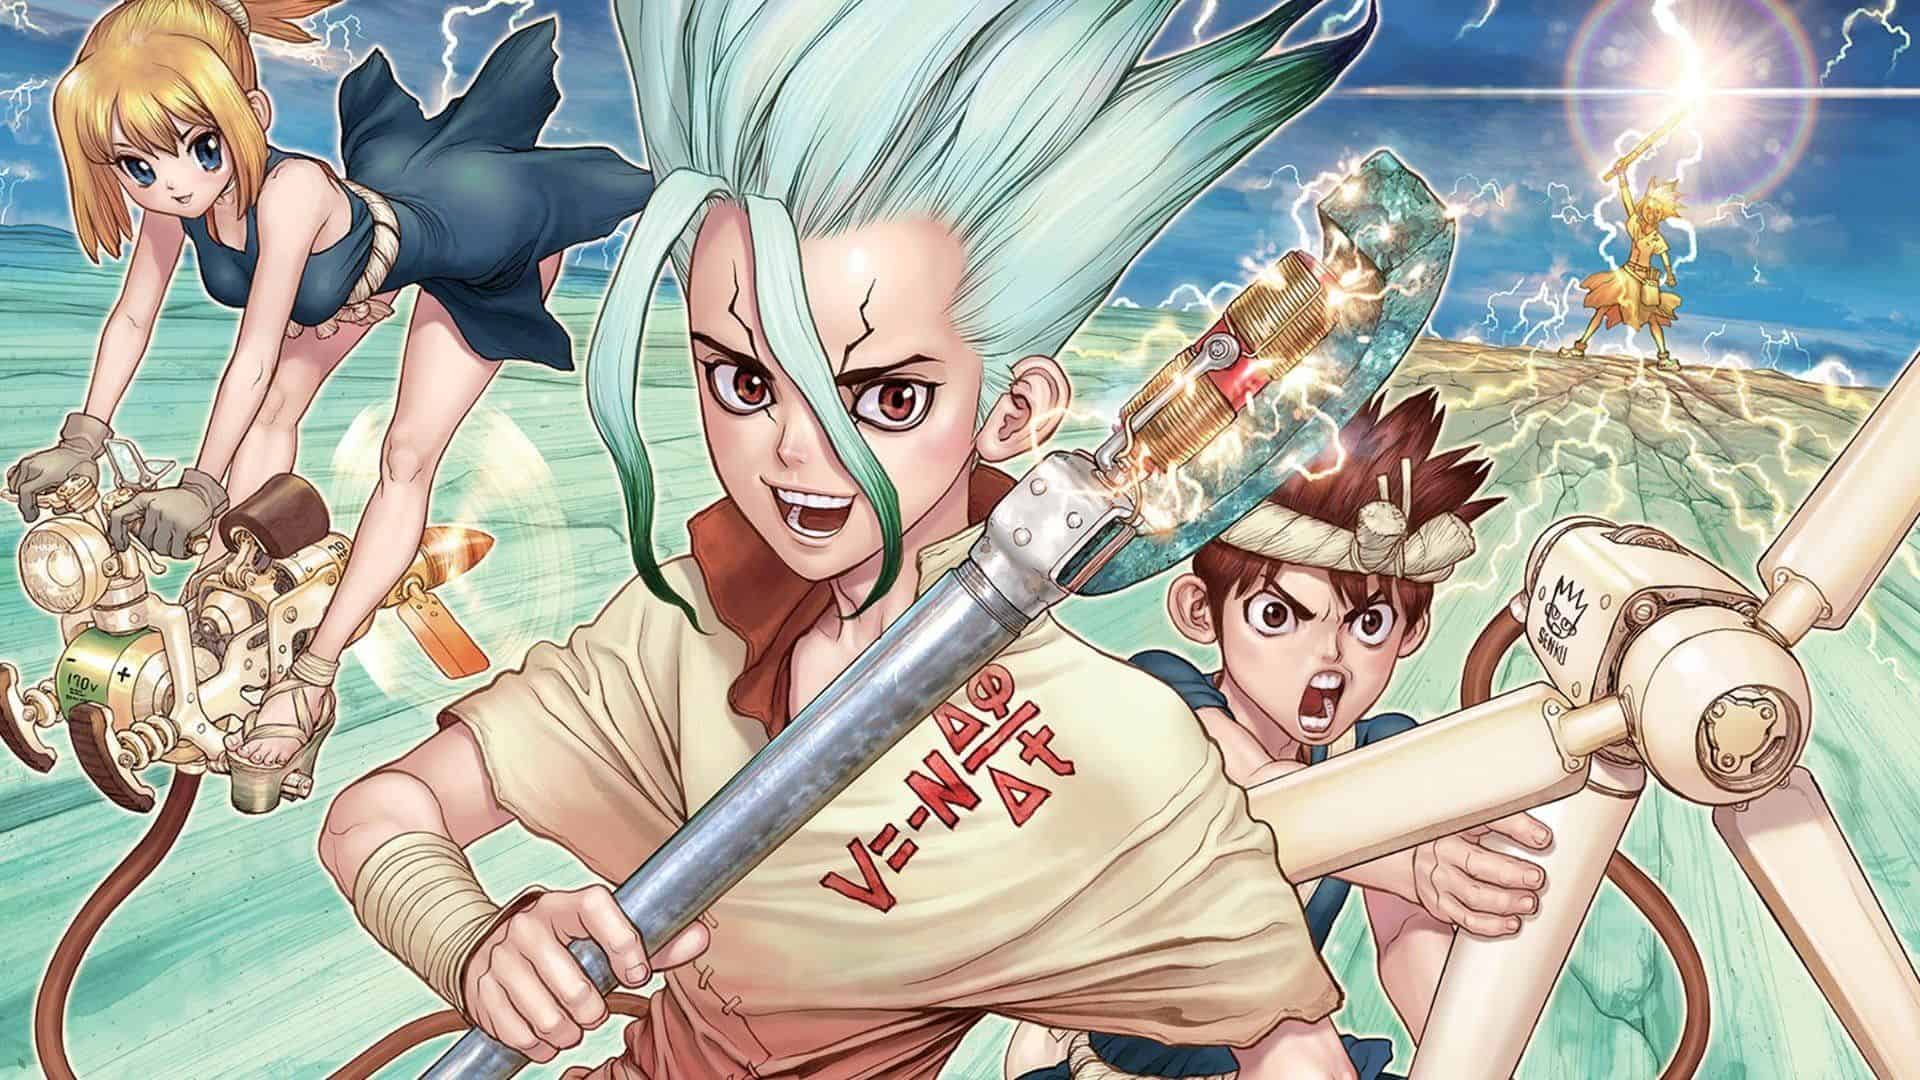 Dr. stone characters 